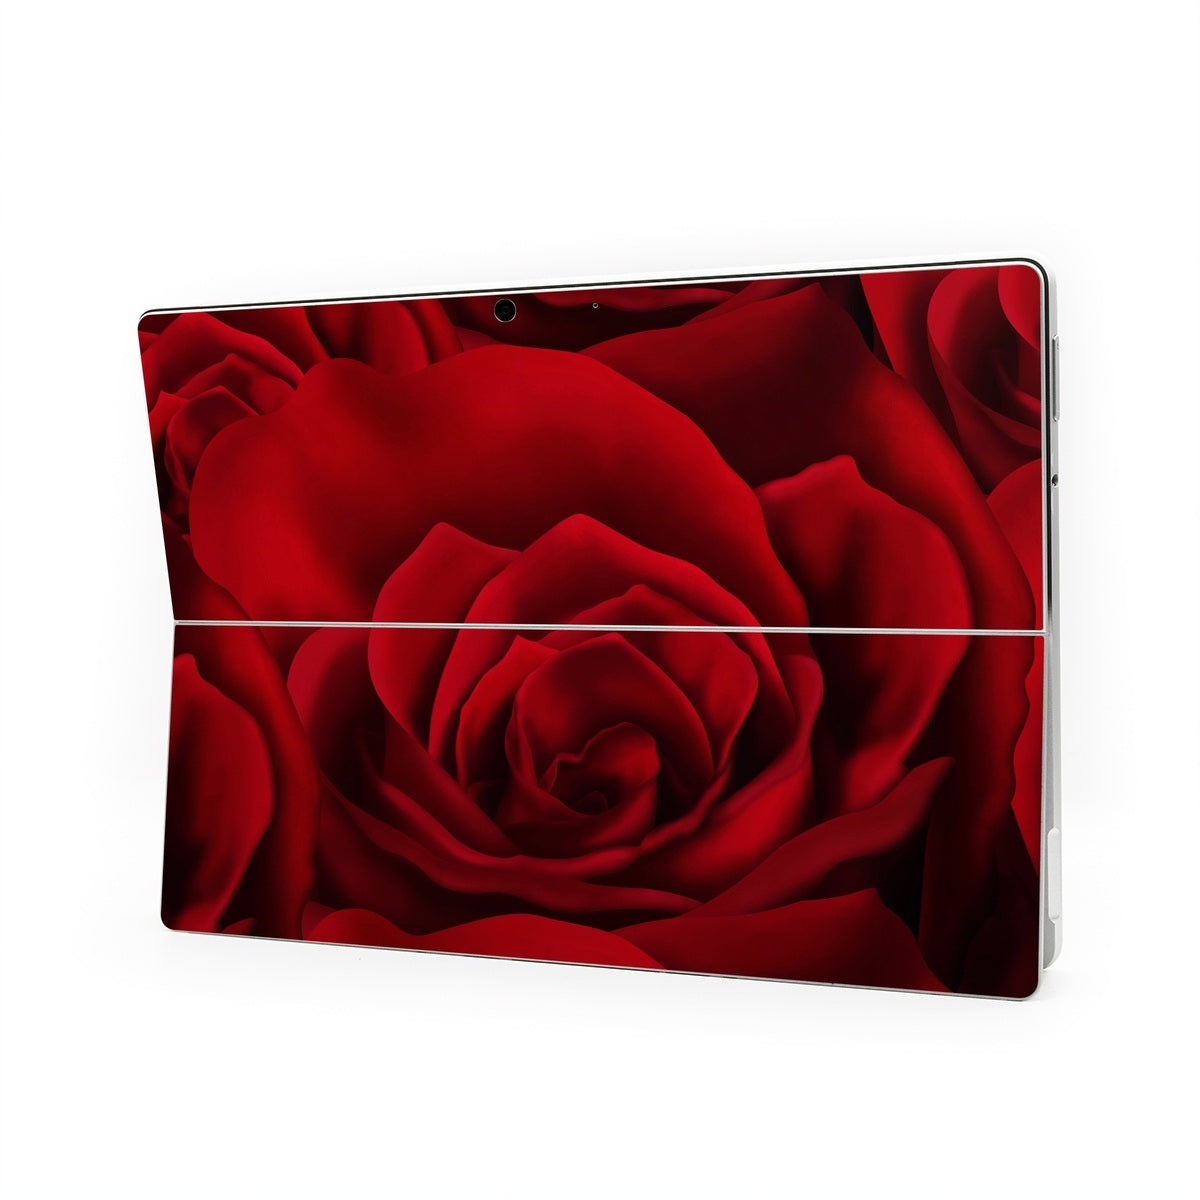 By Any Other Name - Microsoft Surface Pro Skin